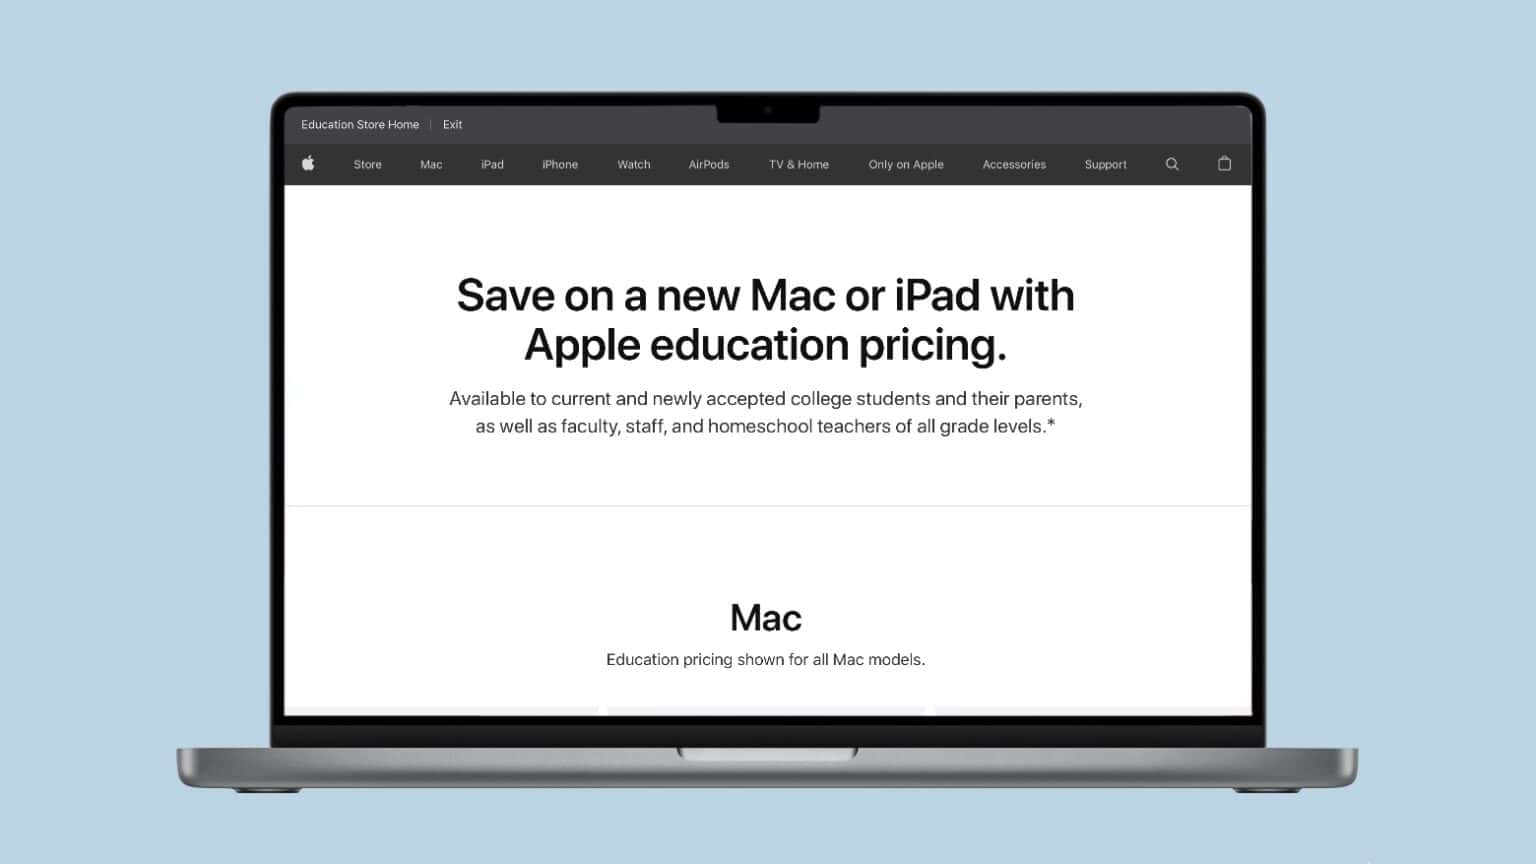 Apple education discounts available again without student verification